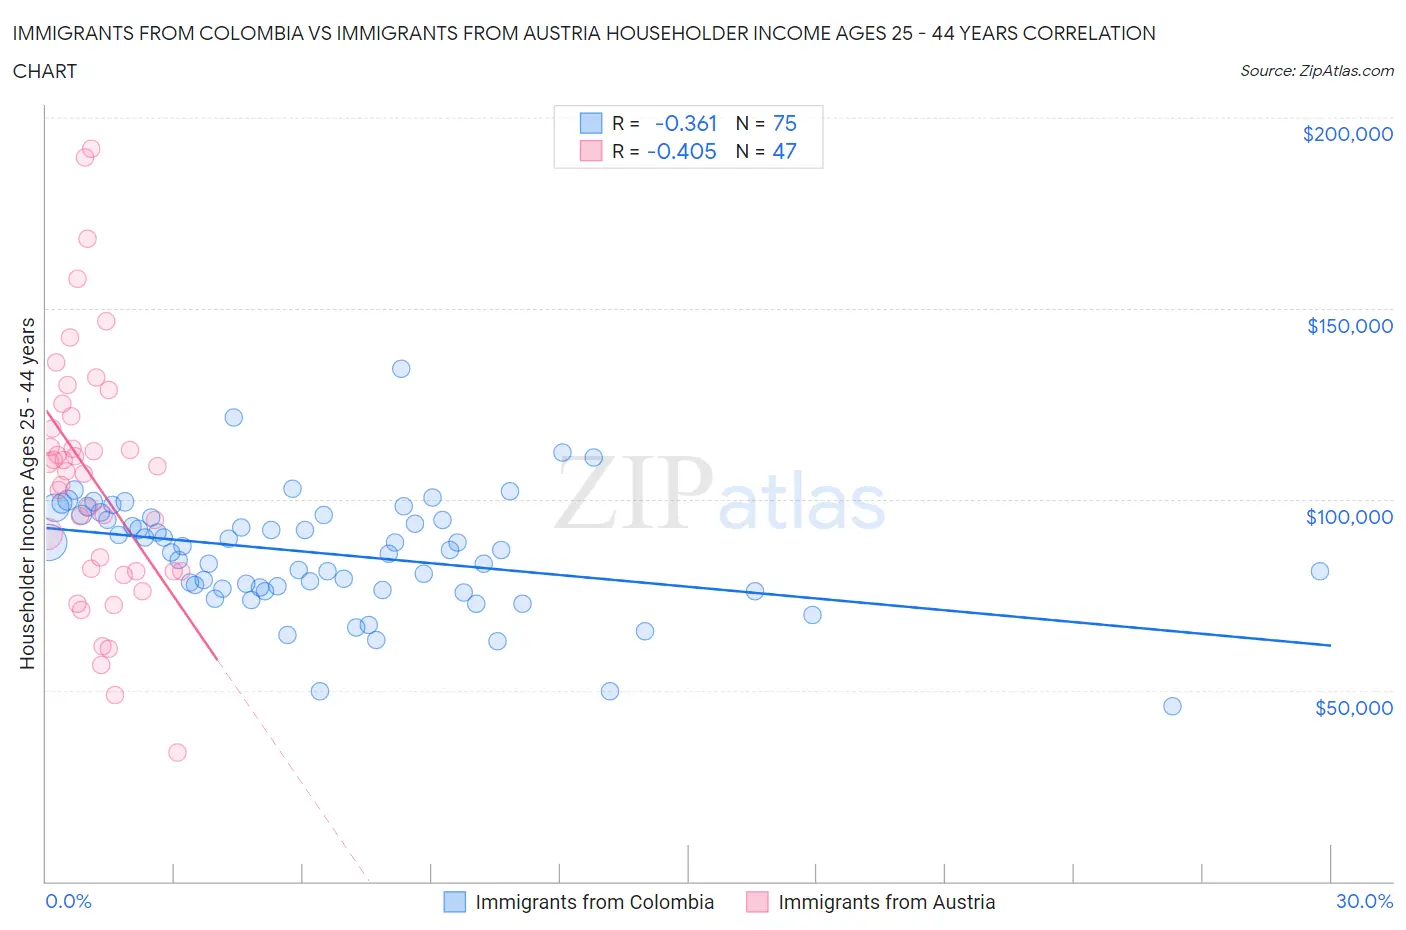 Immigrants from Colombia vs Immigrants from Austria Householder Income Ages 25 - 44 years